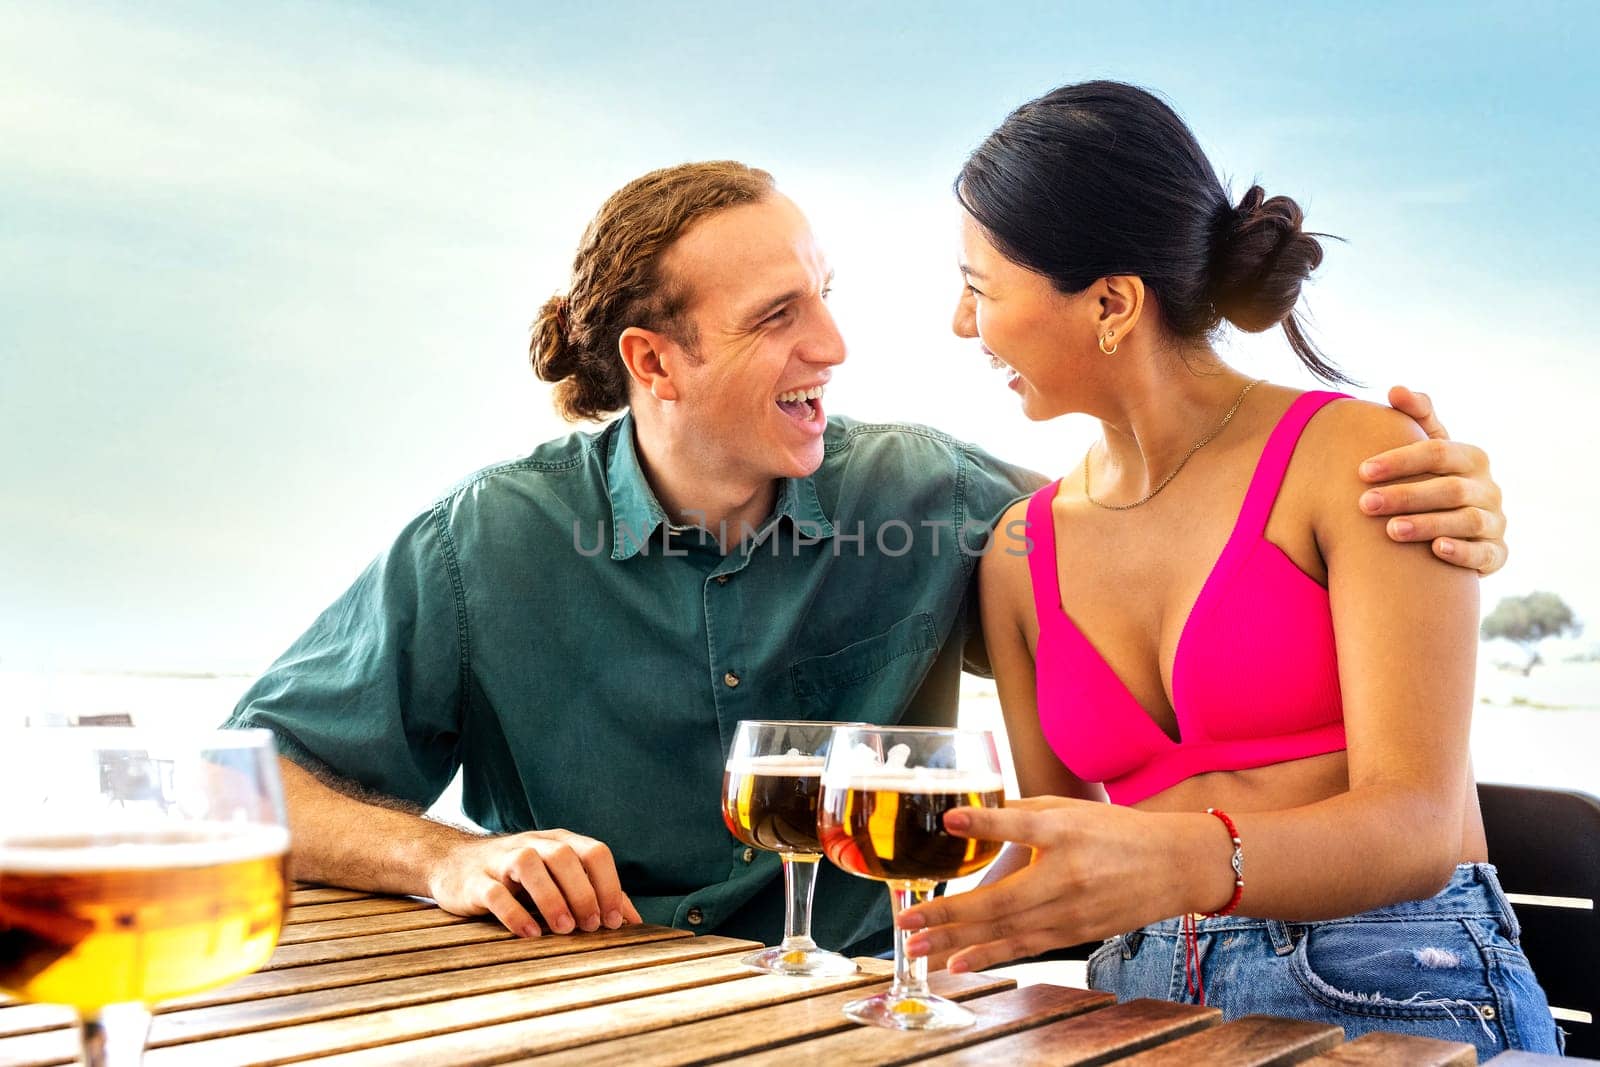 Happy multiracial couple on vacation having drinks together at a beach bar drinking beer. Lifestyle and summertime concept.